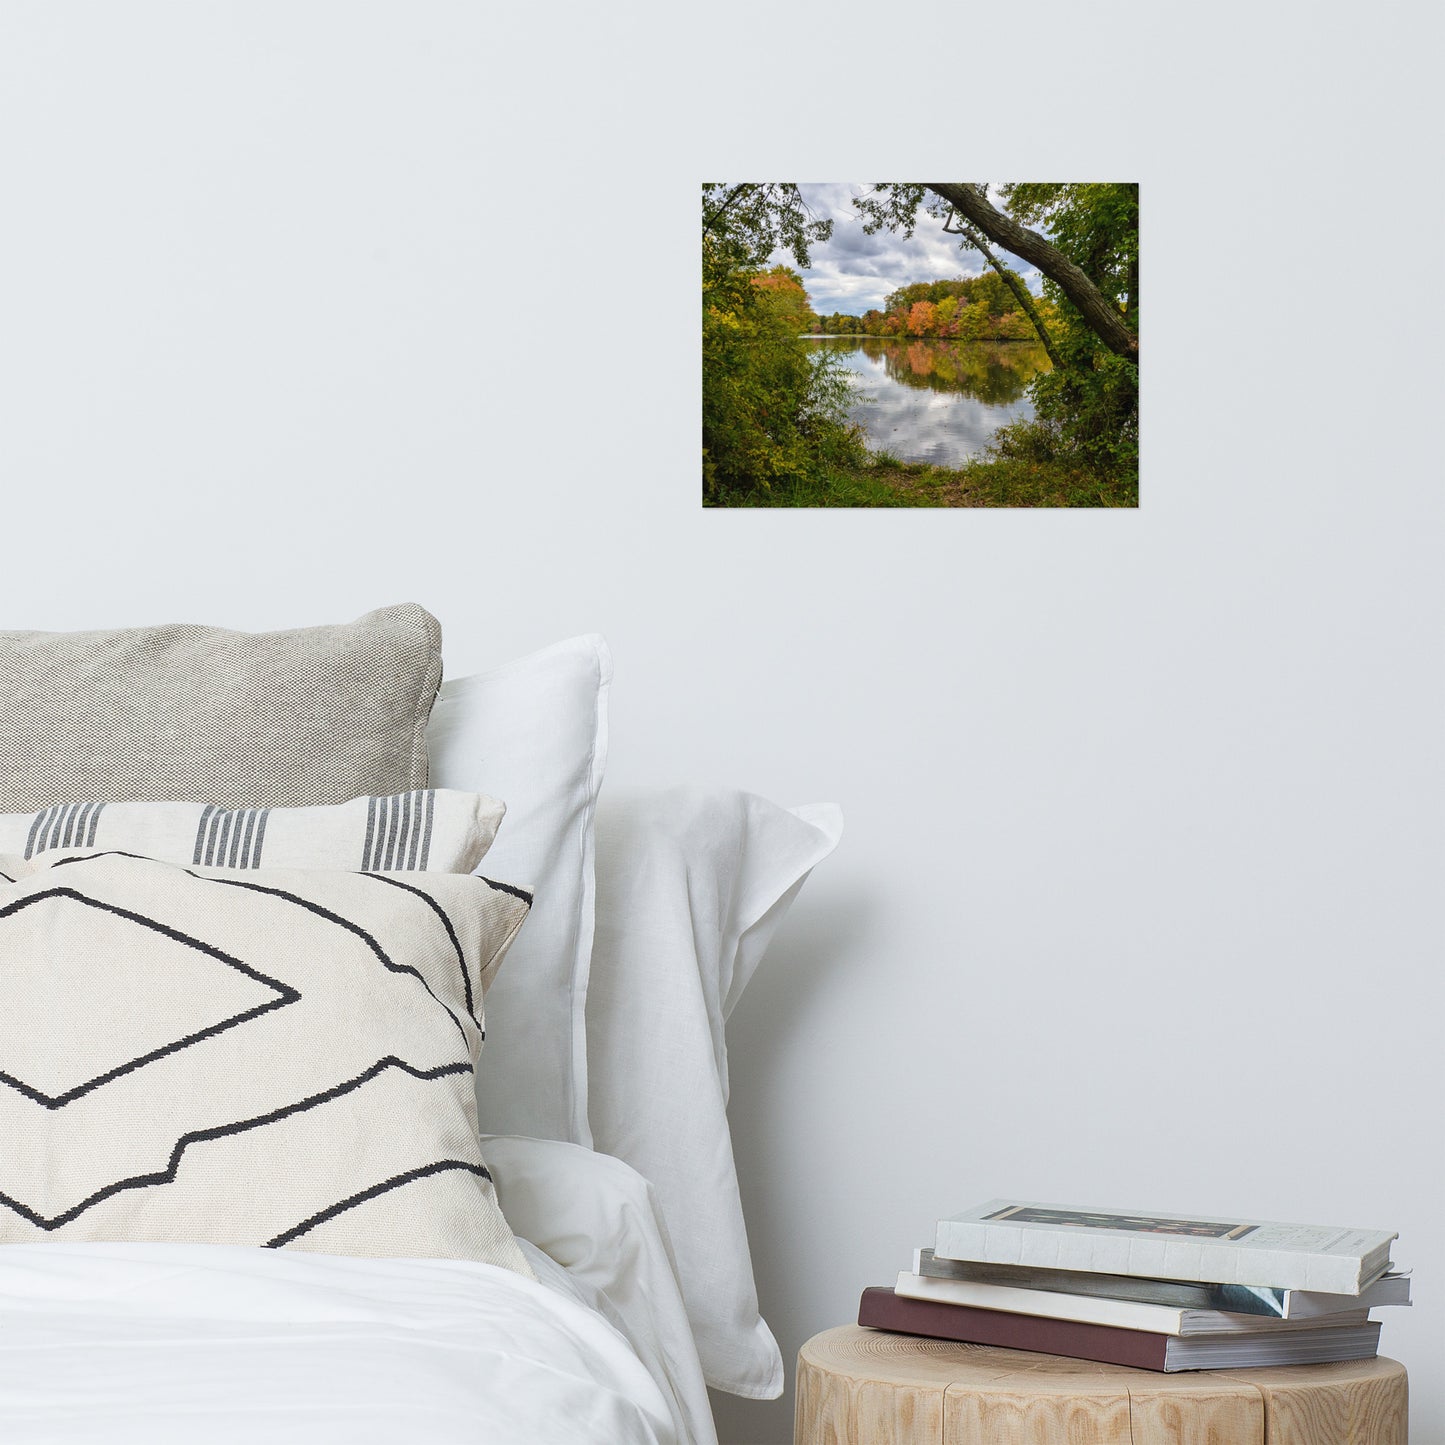 Lost in Autumn Color Landscape Photo Loose Wall Art Prints